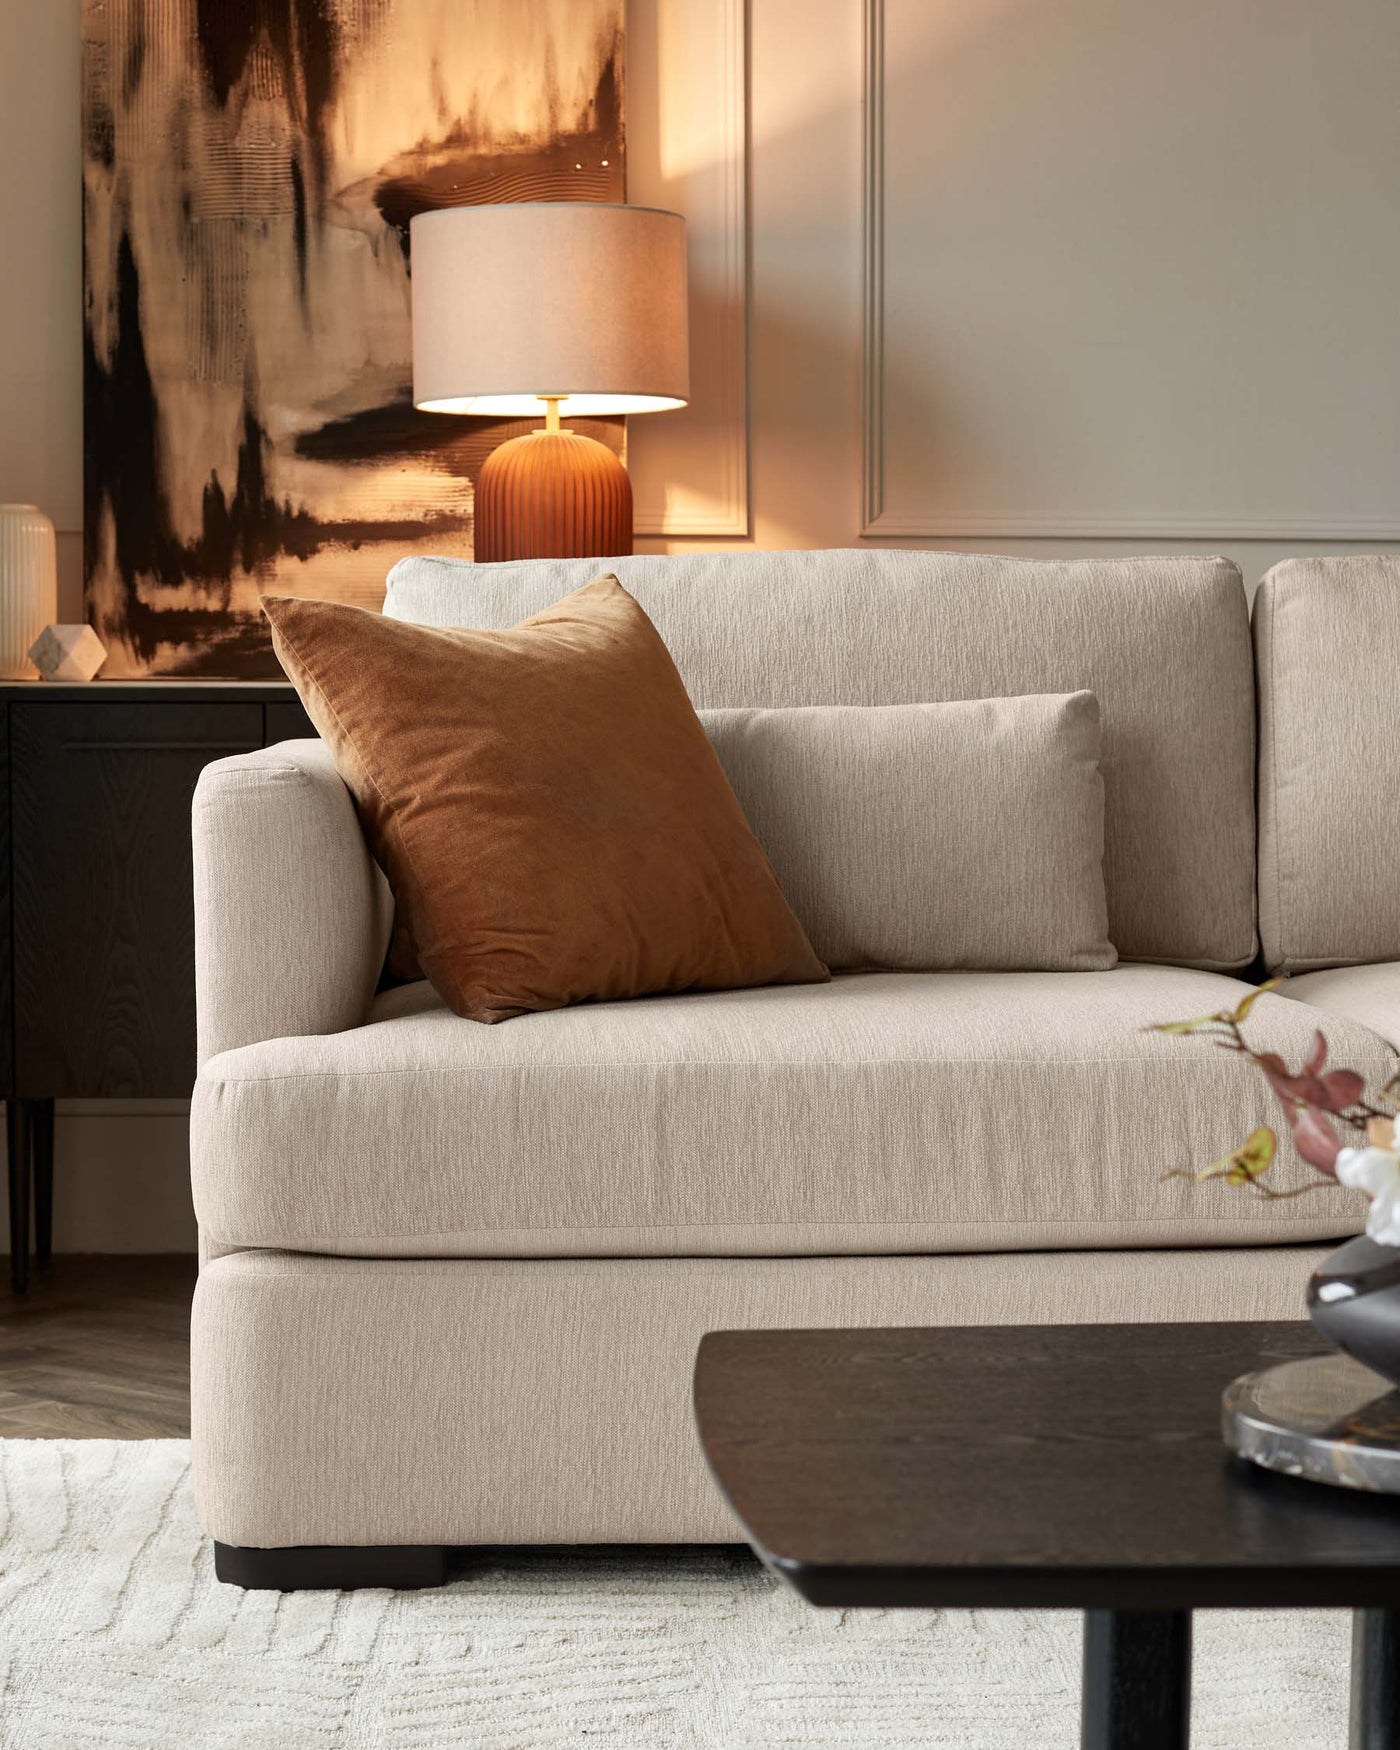 A contemporary beige upholstered sofa with clean lines, complemented by plush pillows, one of which is in a rich brown velvet fabric. Beside the sofa is a black side table with an opaque storage door, topped by a modern table lamp with a ribbed base and a beige lampshade. In the foreground is a dark wooden coffee table with an organic shape, all set upon a textured off-white area rug.